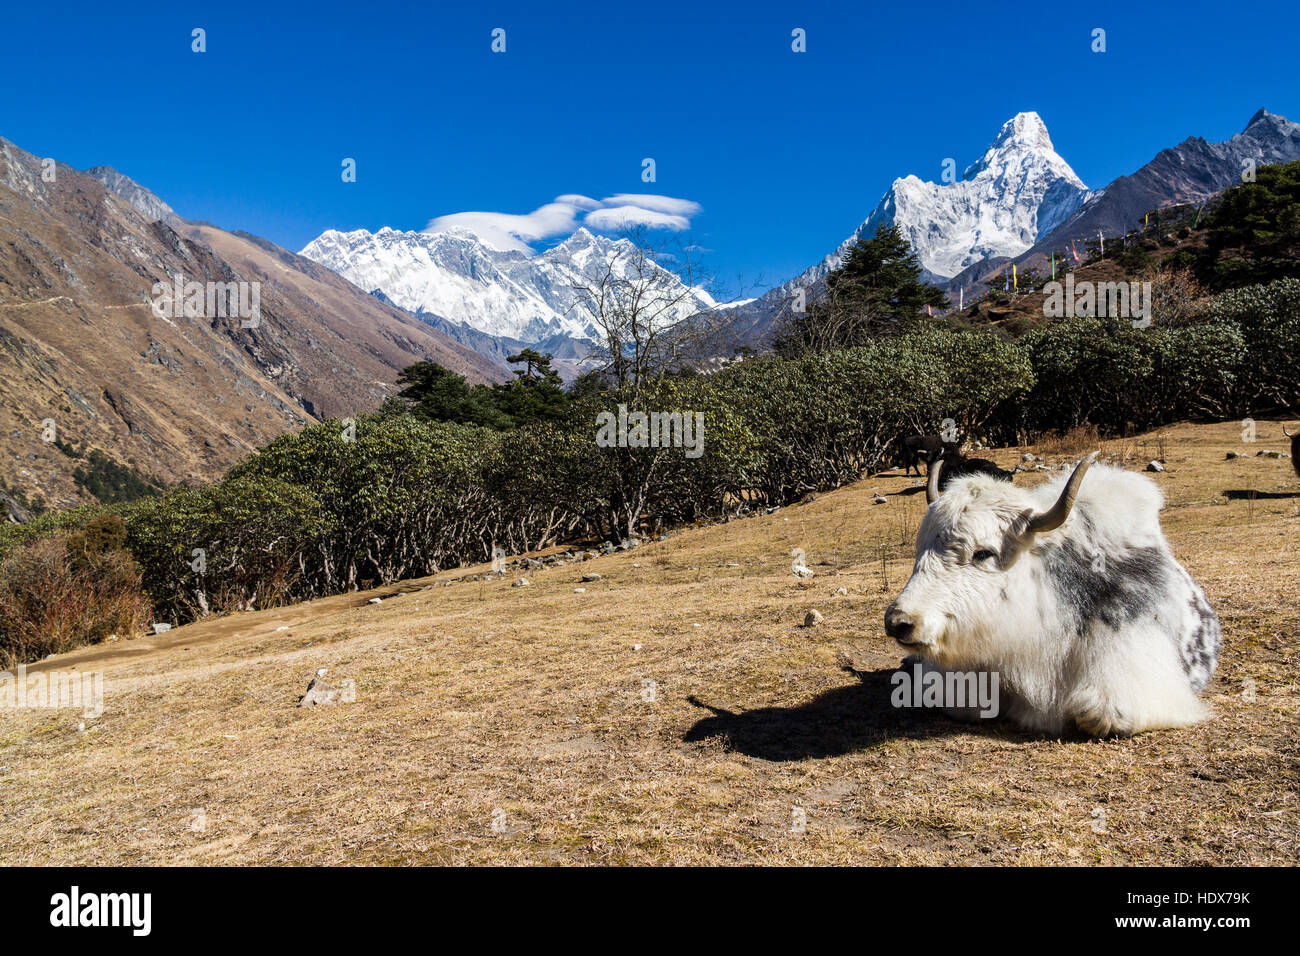 A white yak is lying on a meadow, the montains Mt. Everest (8848m) and Ama Dablam (6856m) in the distance Stock Photo